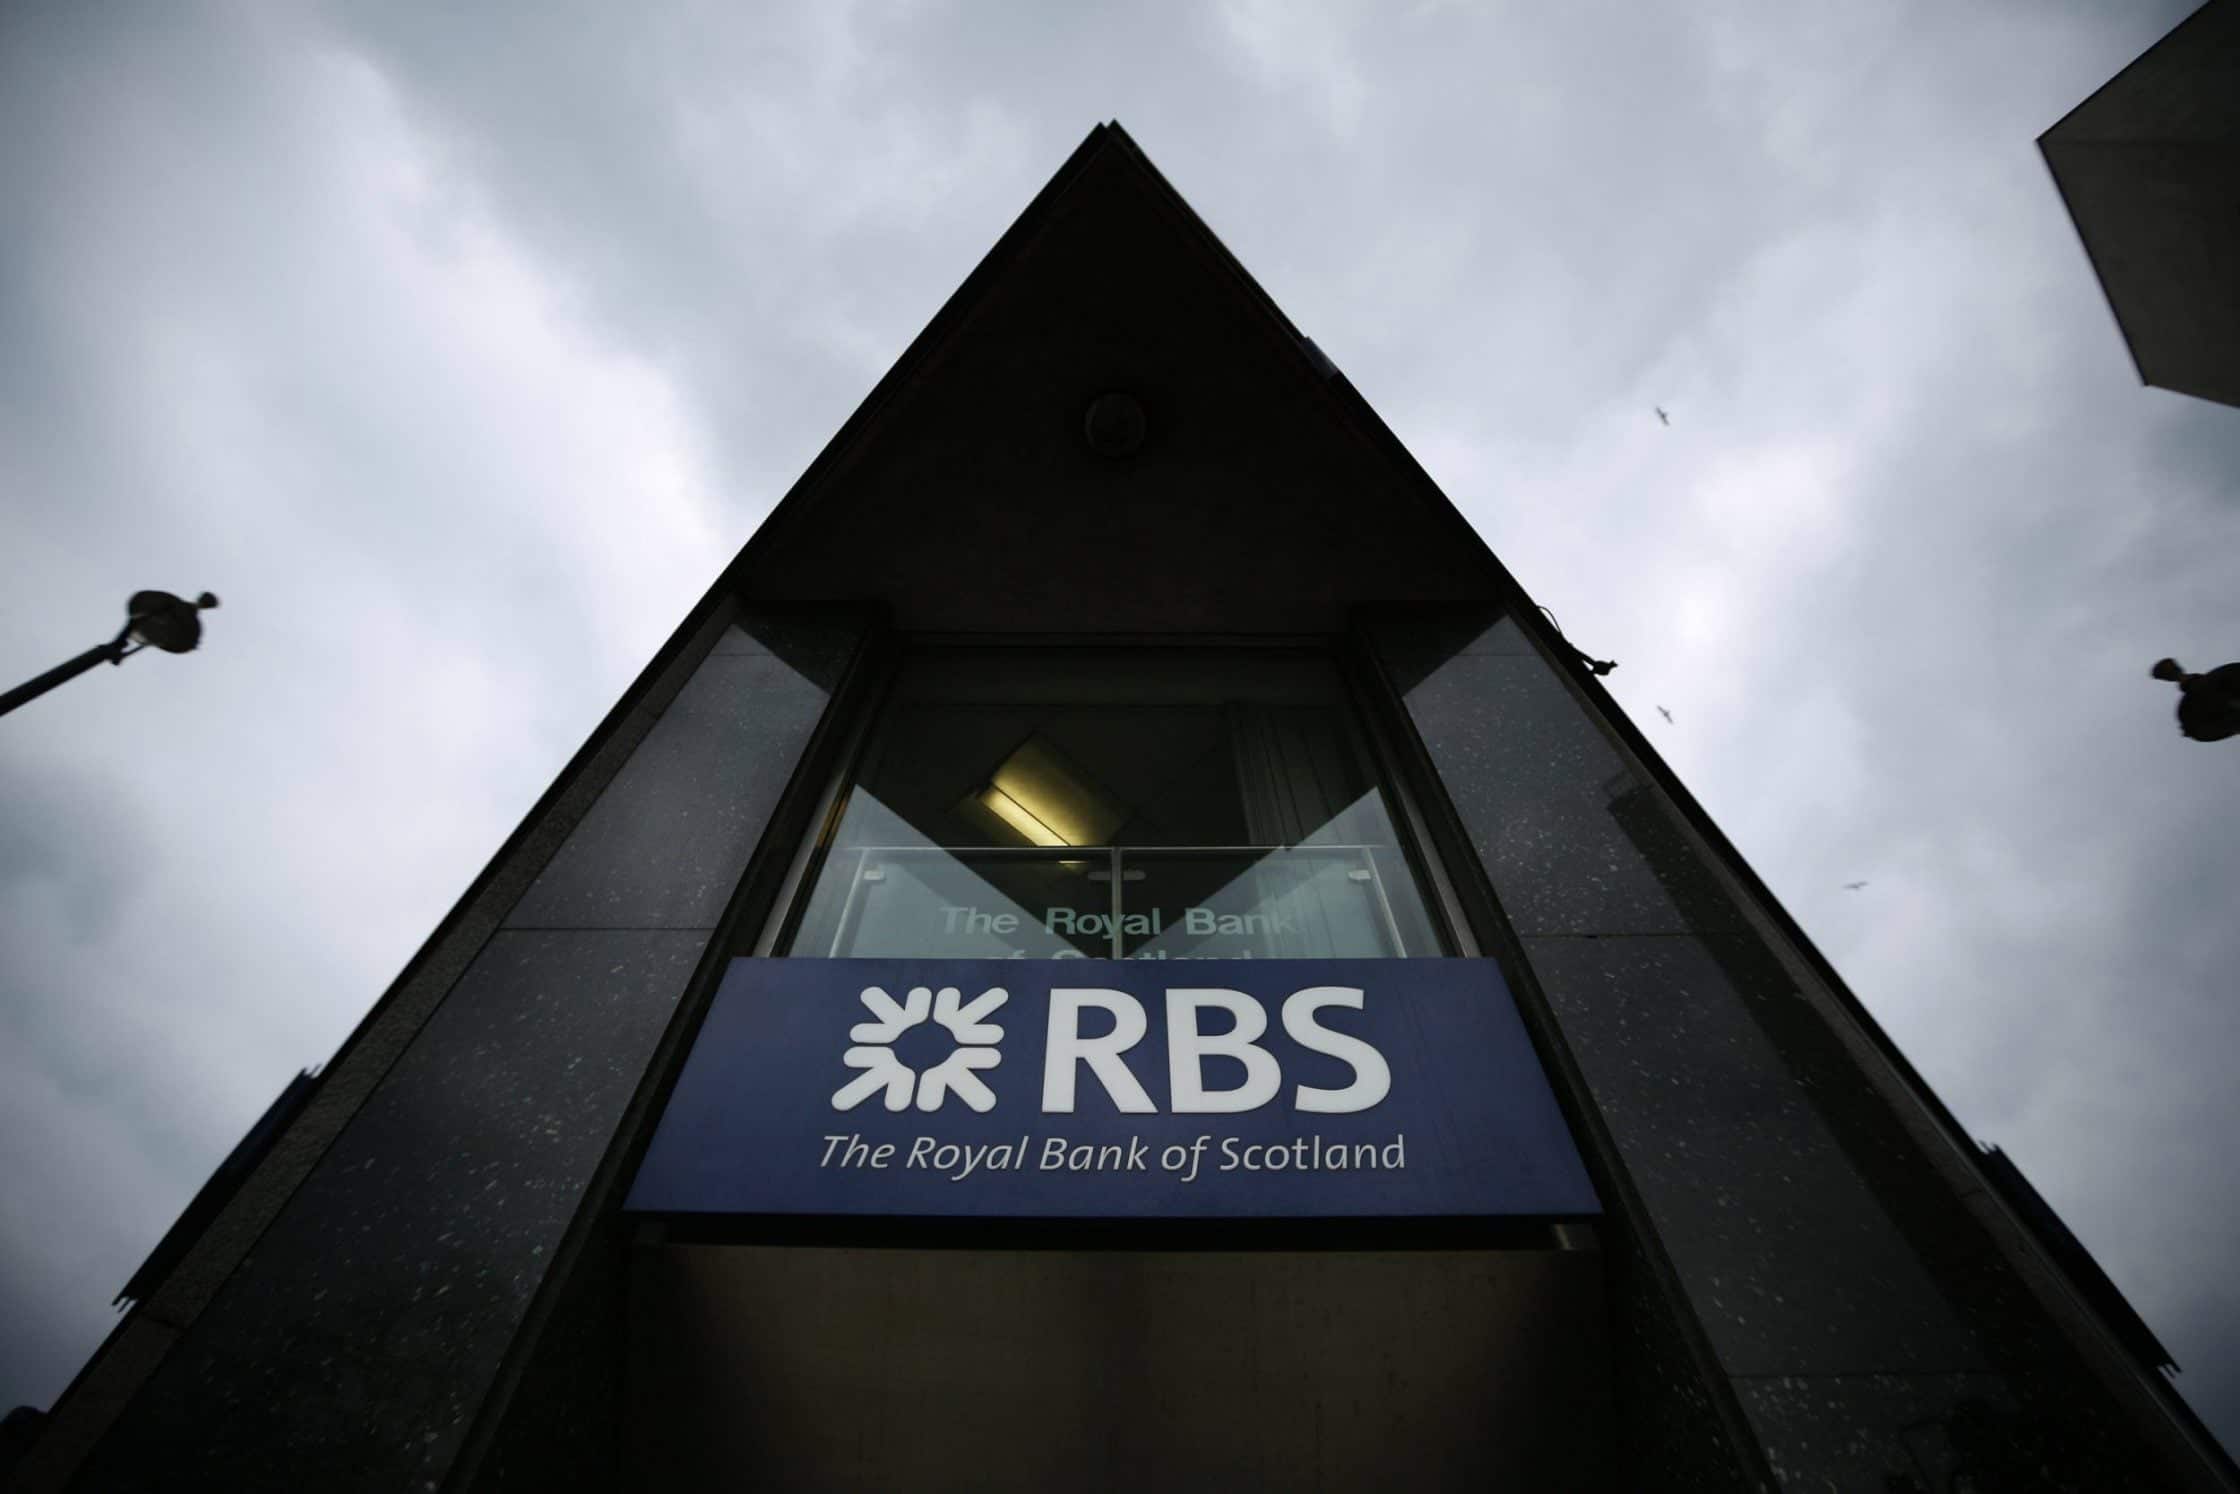 rbs grg claim solicitors financial mis selling irhps